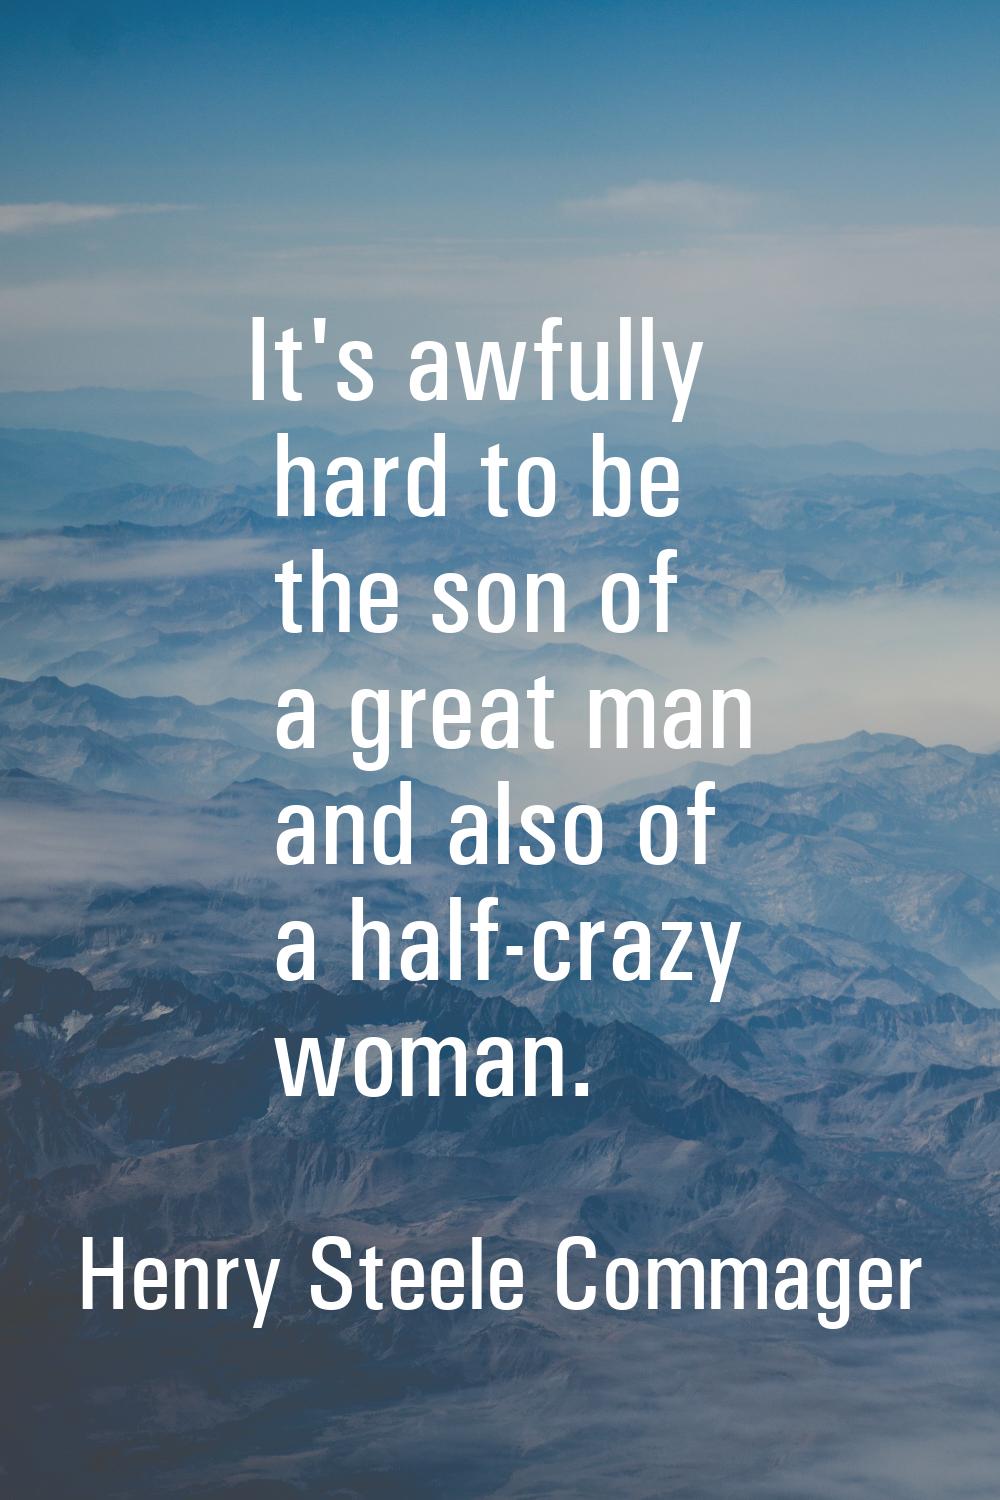 It's awfully hard to be the son of a great man and also of a half-crazy woman.